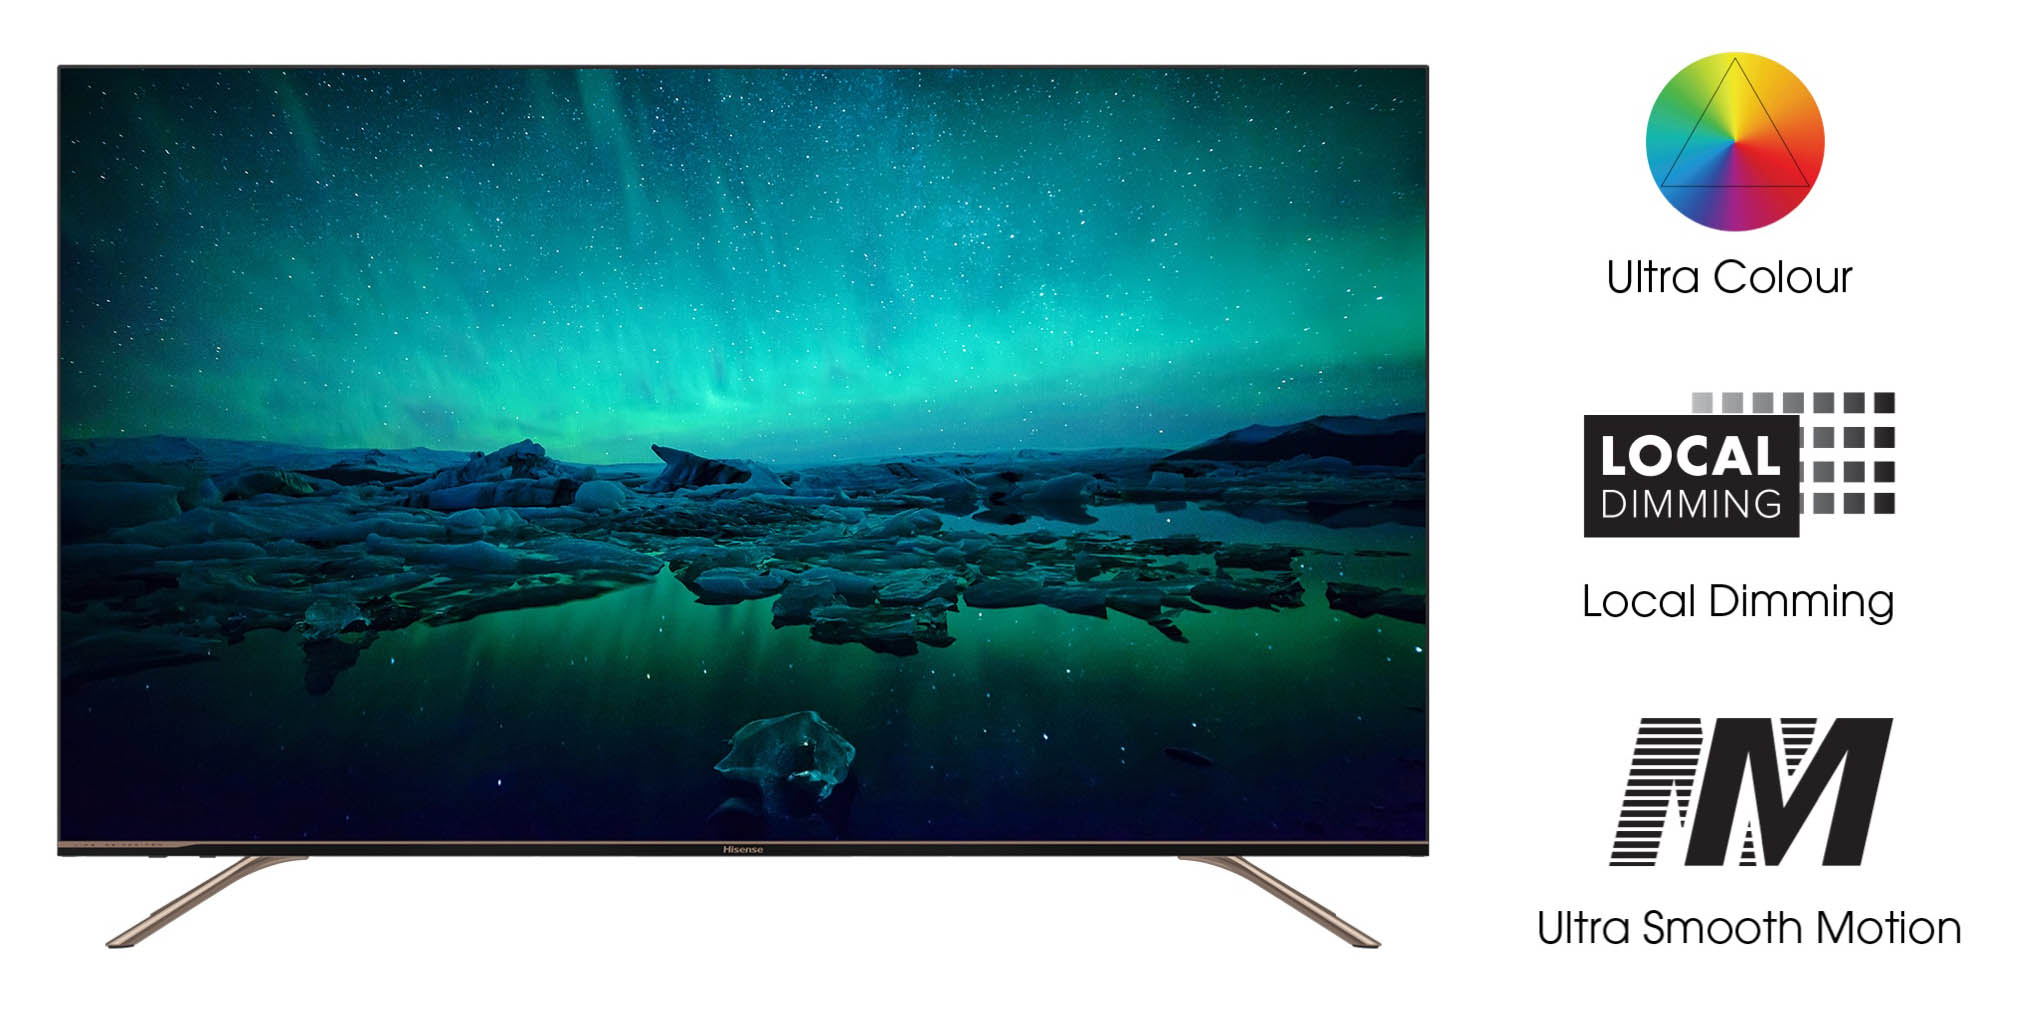 7 Ways to Live Your Best Life at Home with the Latest Hisense #TvSENSEtials